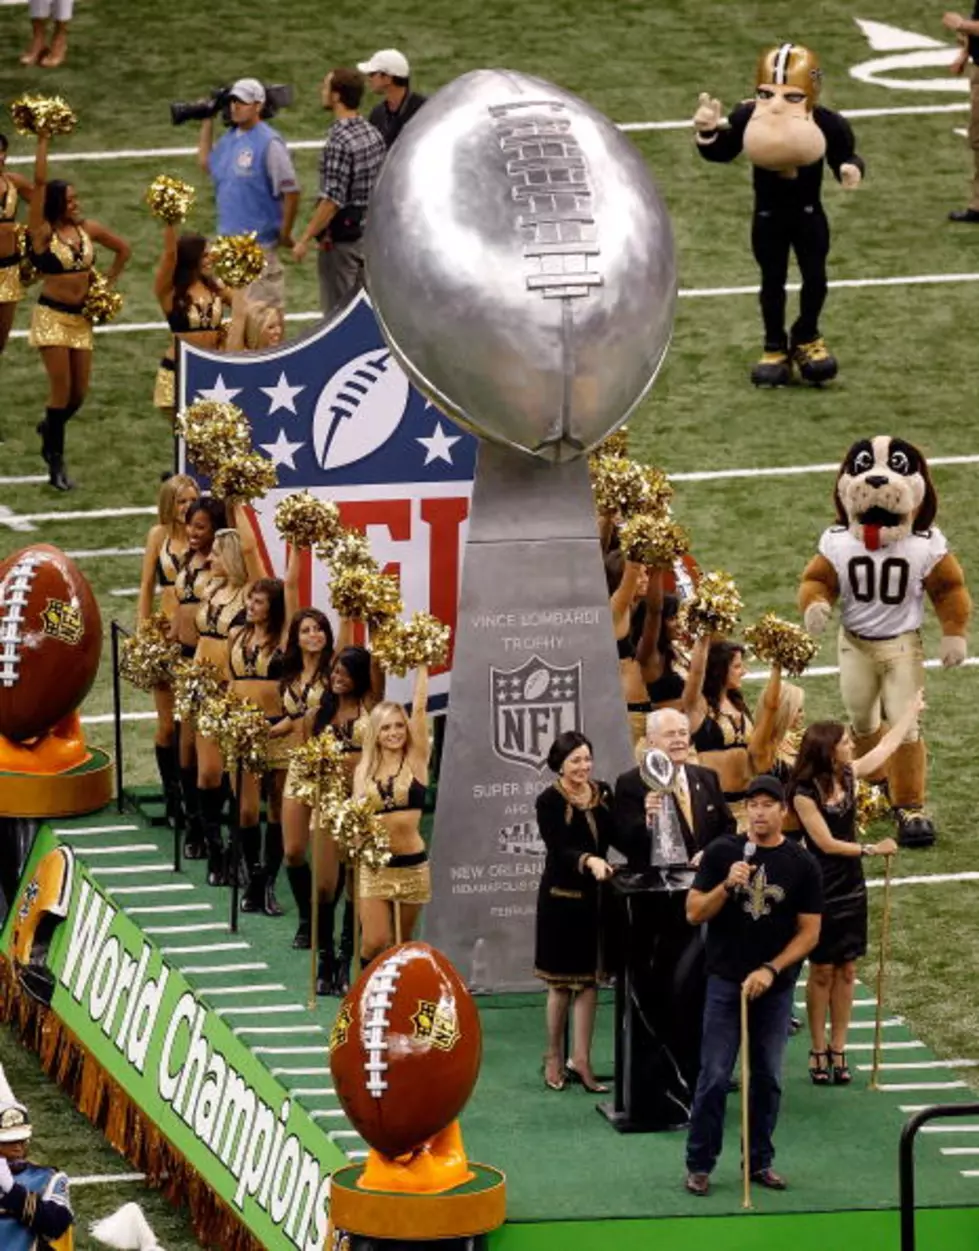 5 Reasons The New Orleans Saints Get Back to the Super Bowl in 2011